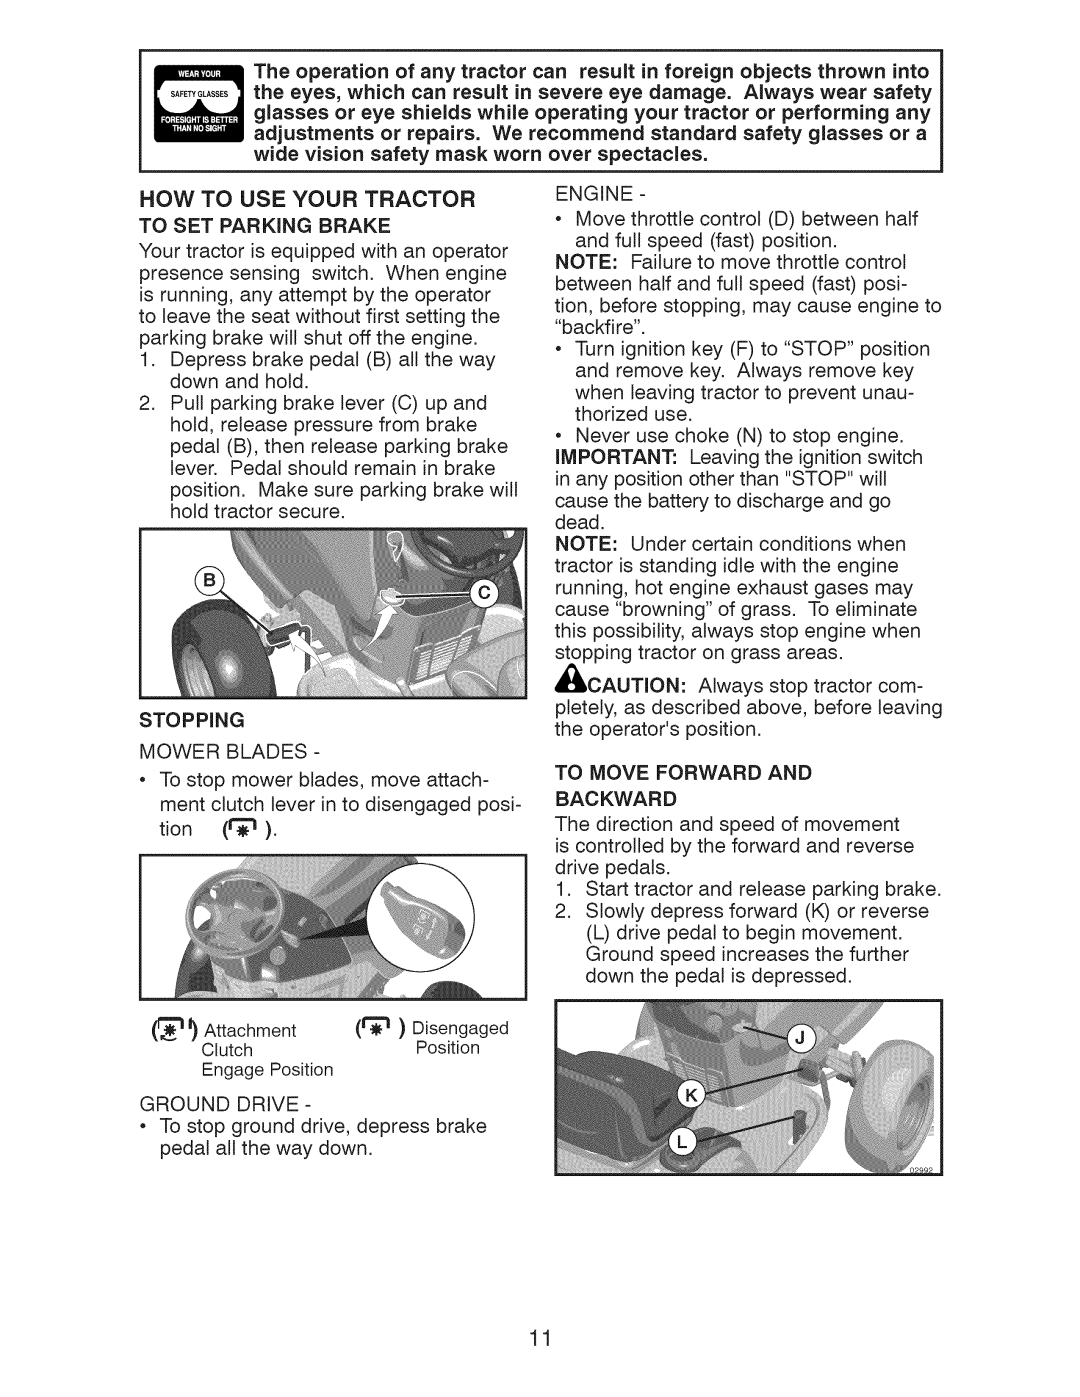 Craftsman 917.289283 owner manual How To Use Your Tractor, Stopping, To Set Parking Brake 